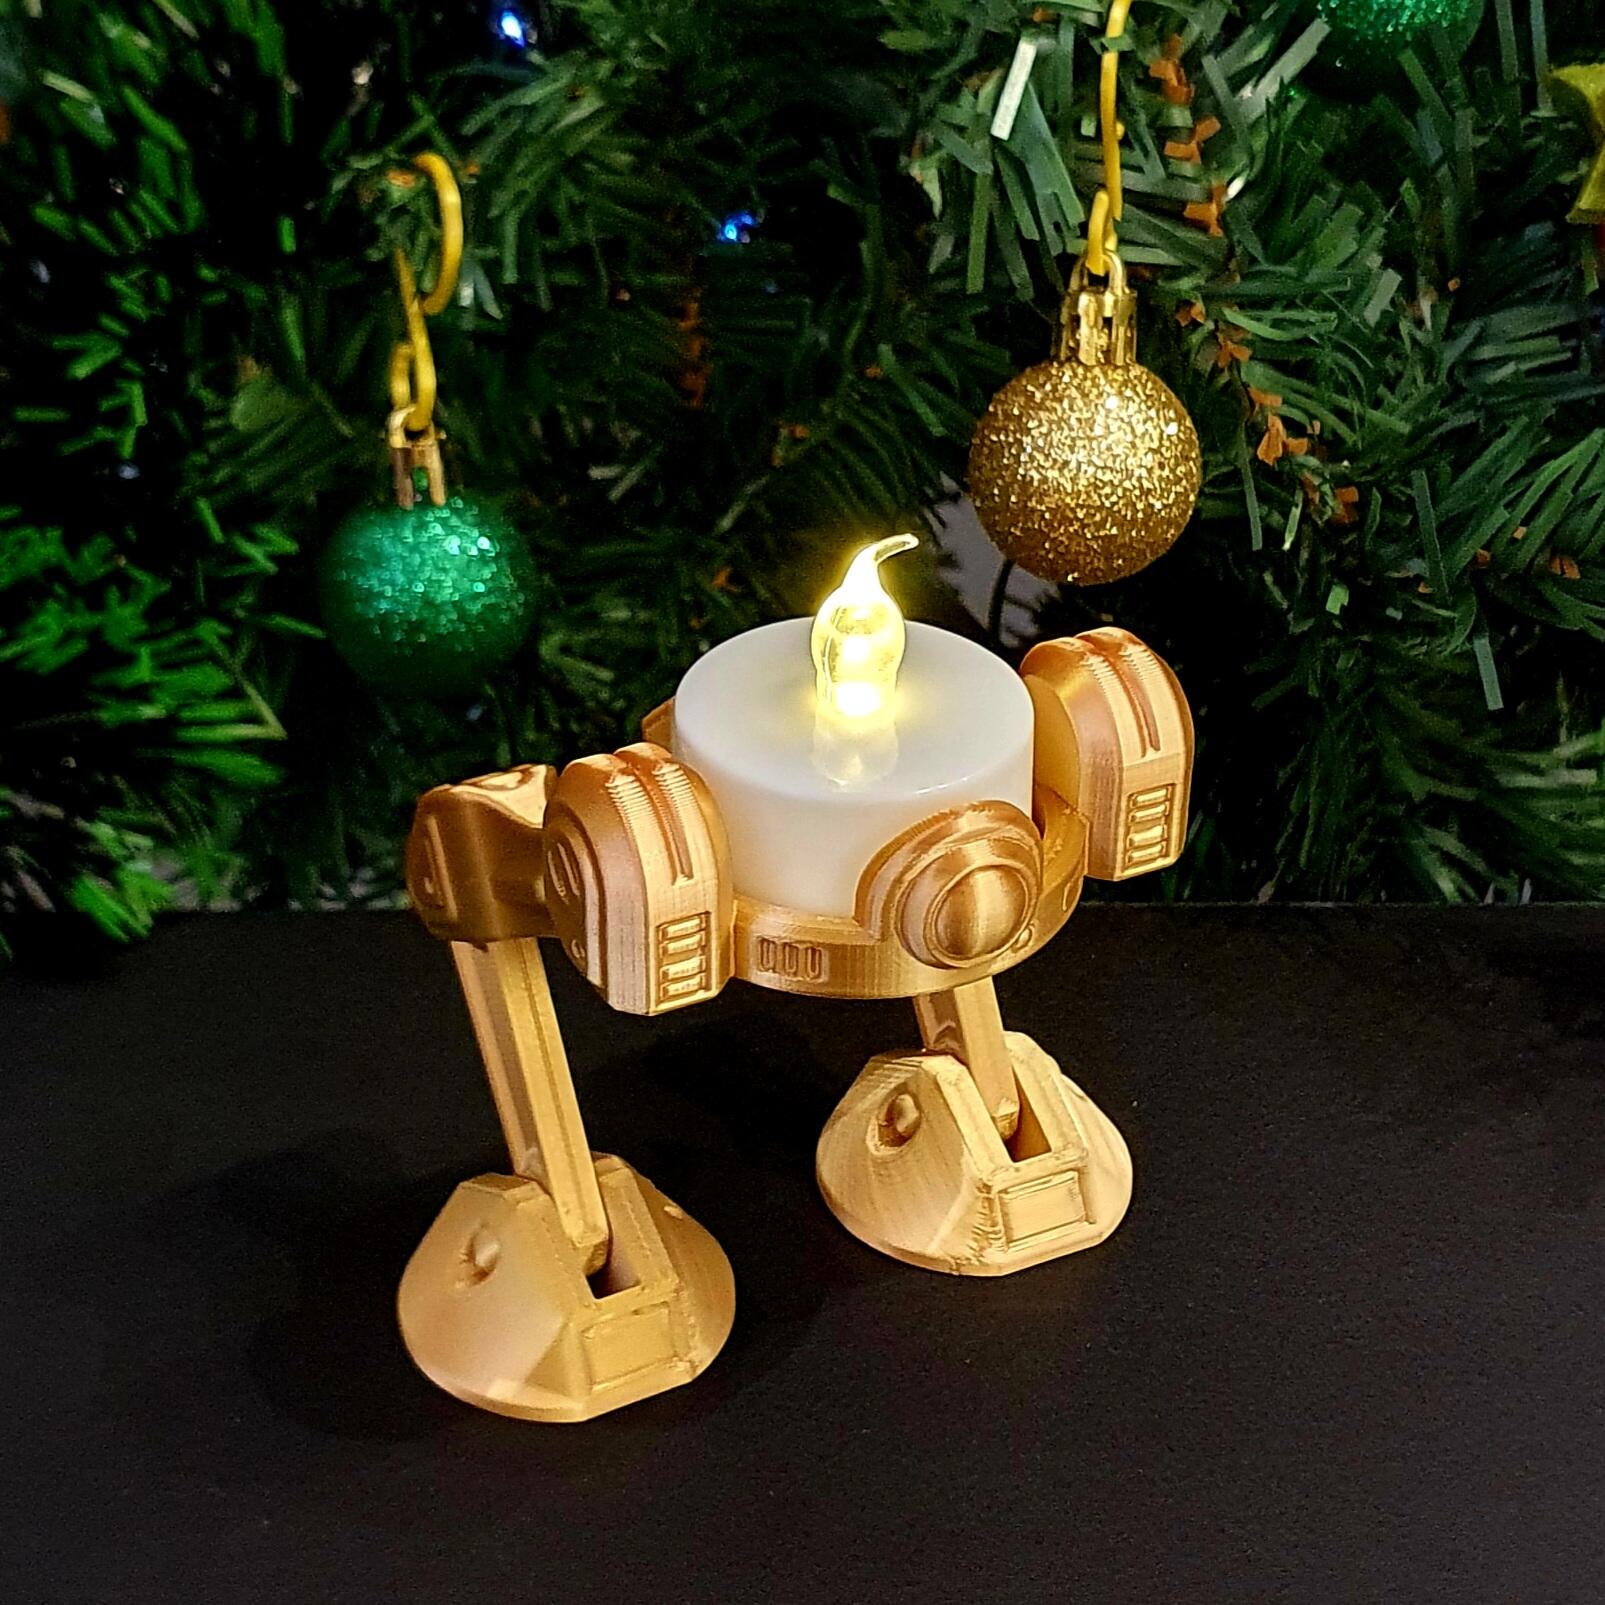 Candle Droid - articulated and print in place